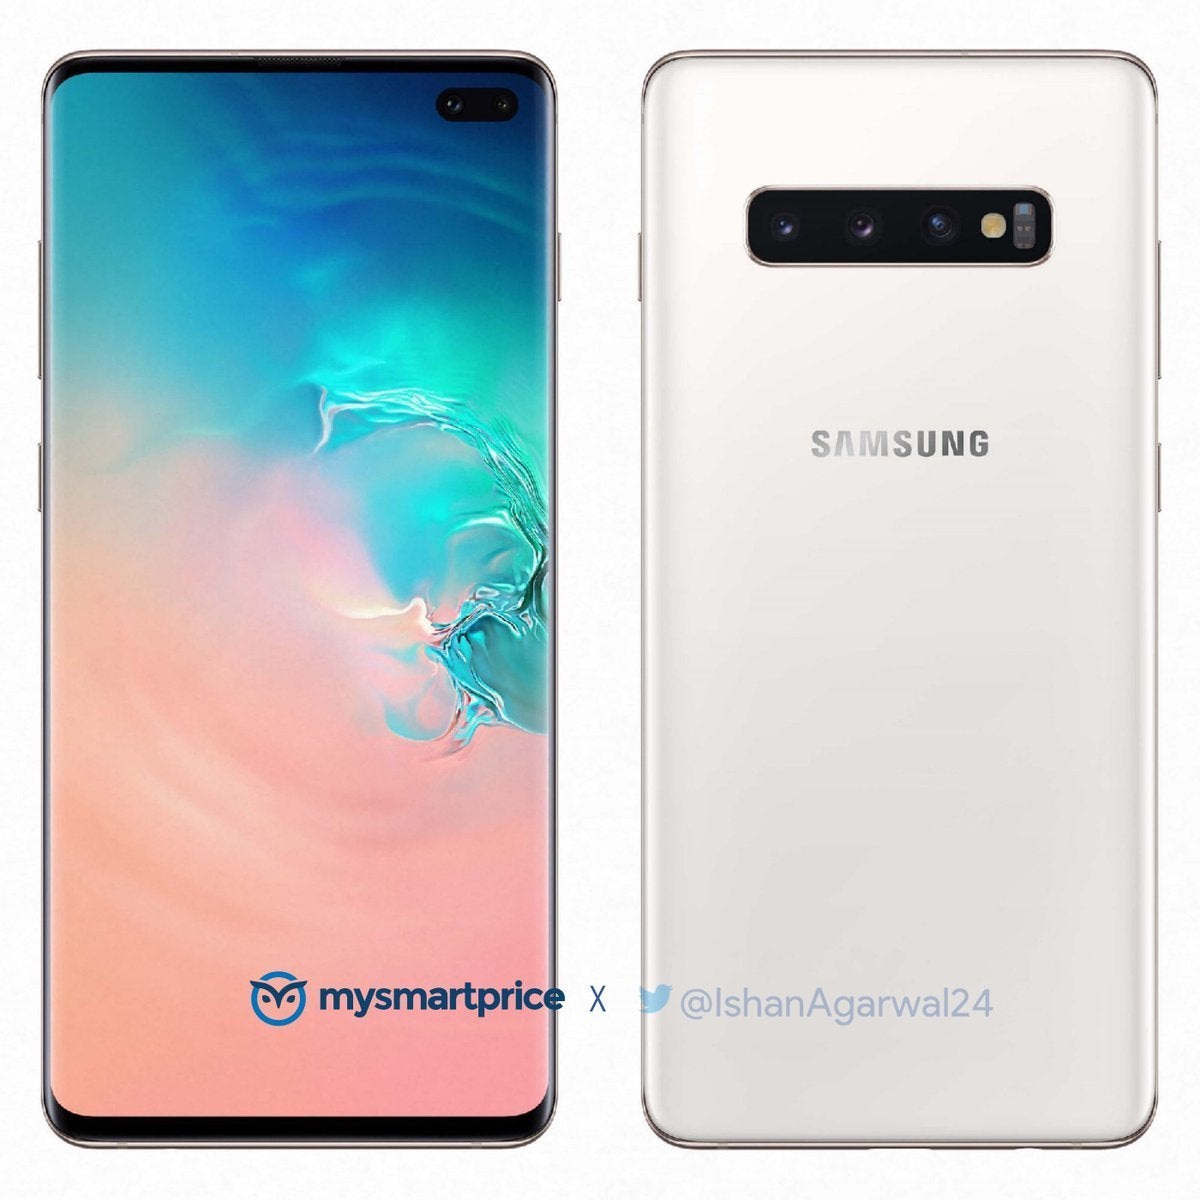 Galaxy S10, S10+ and S10e release date, price, news and leaks